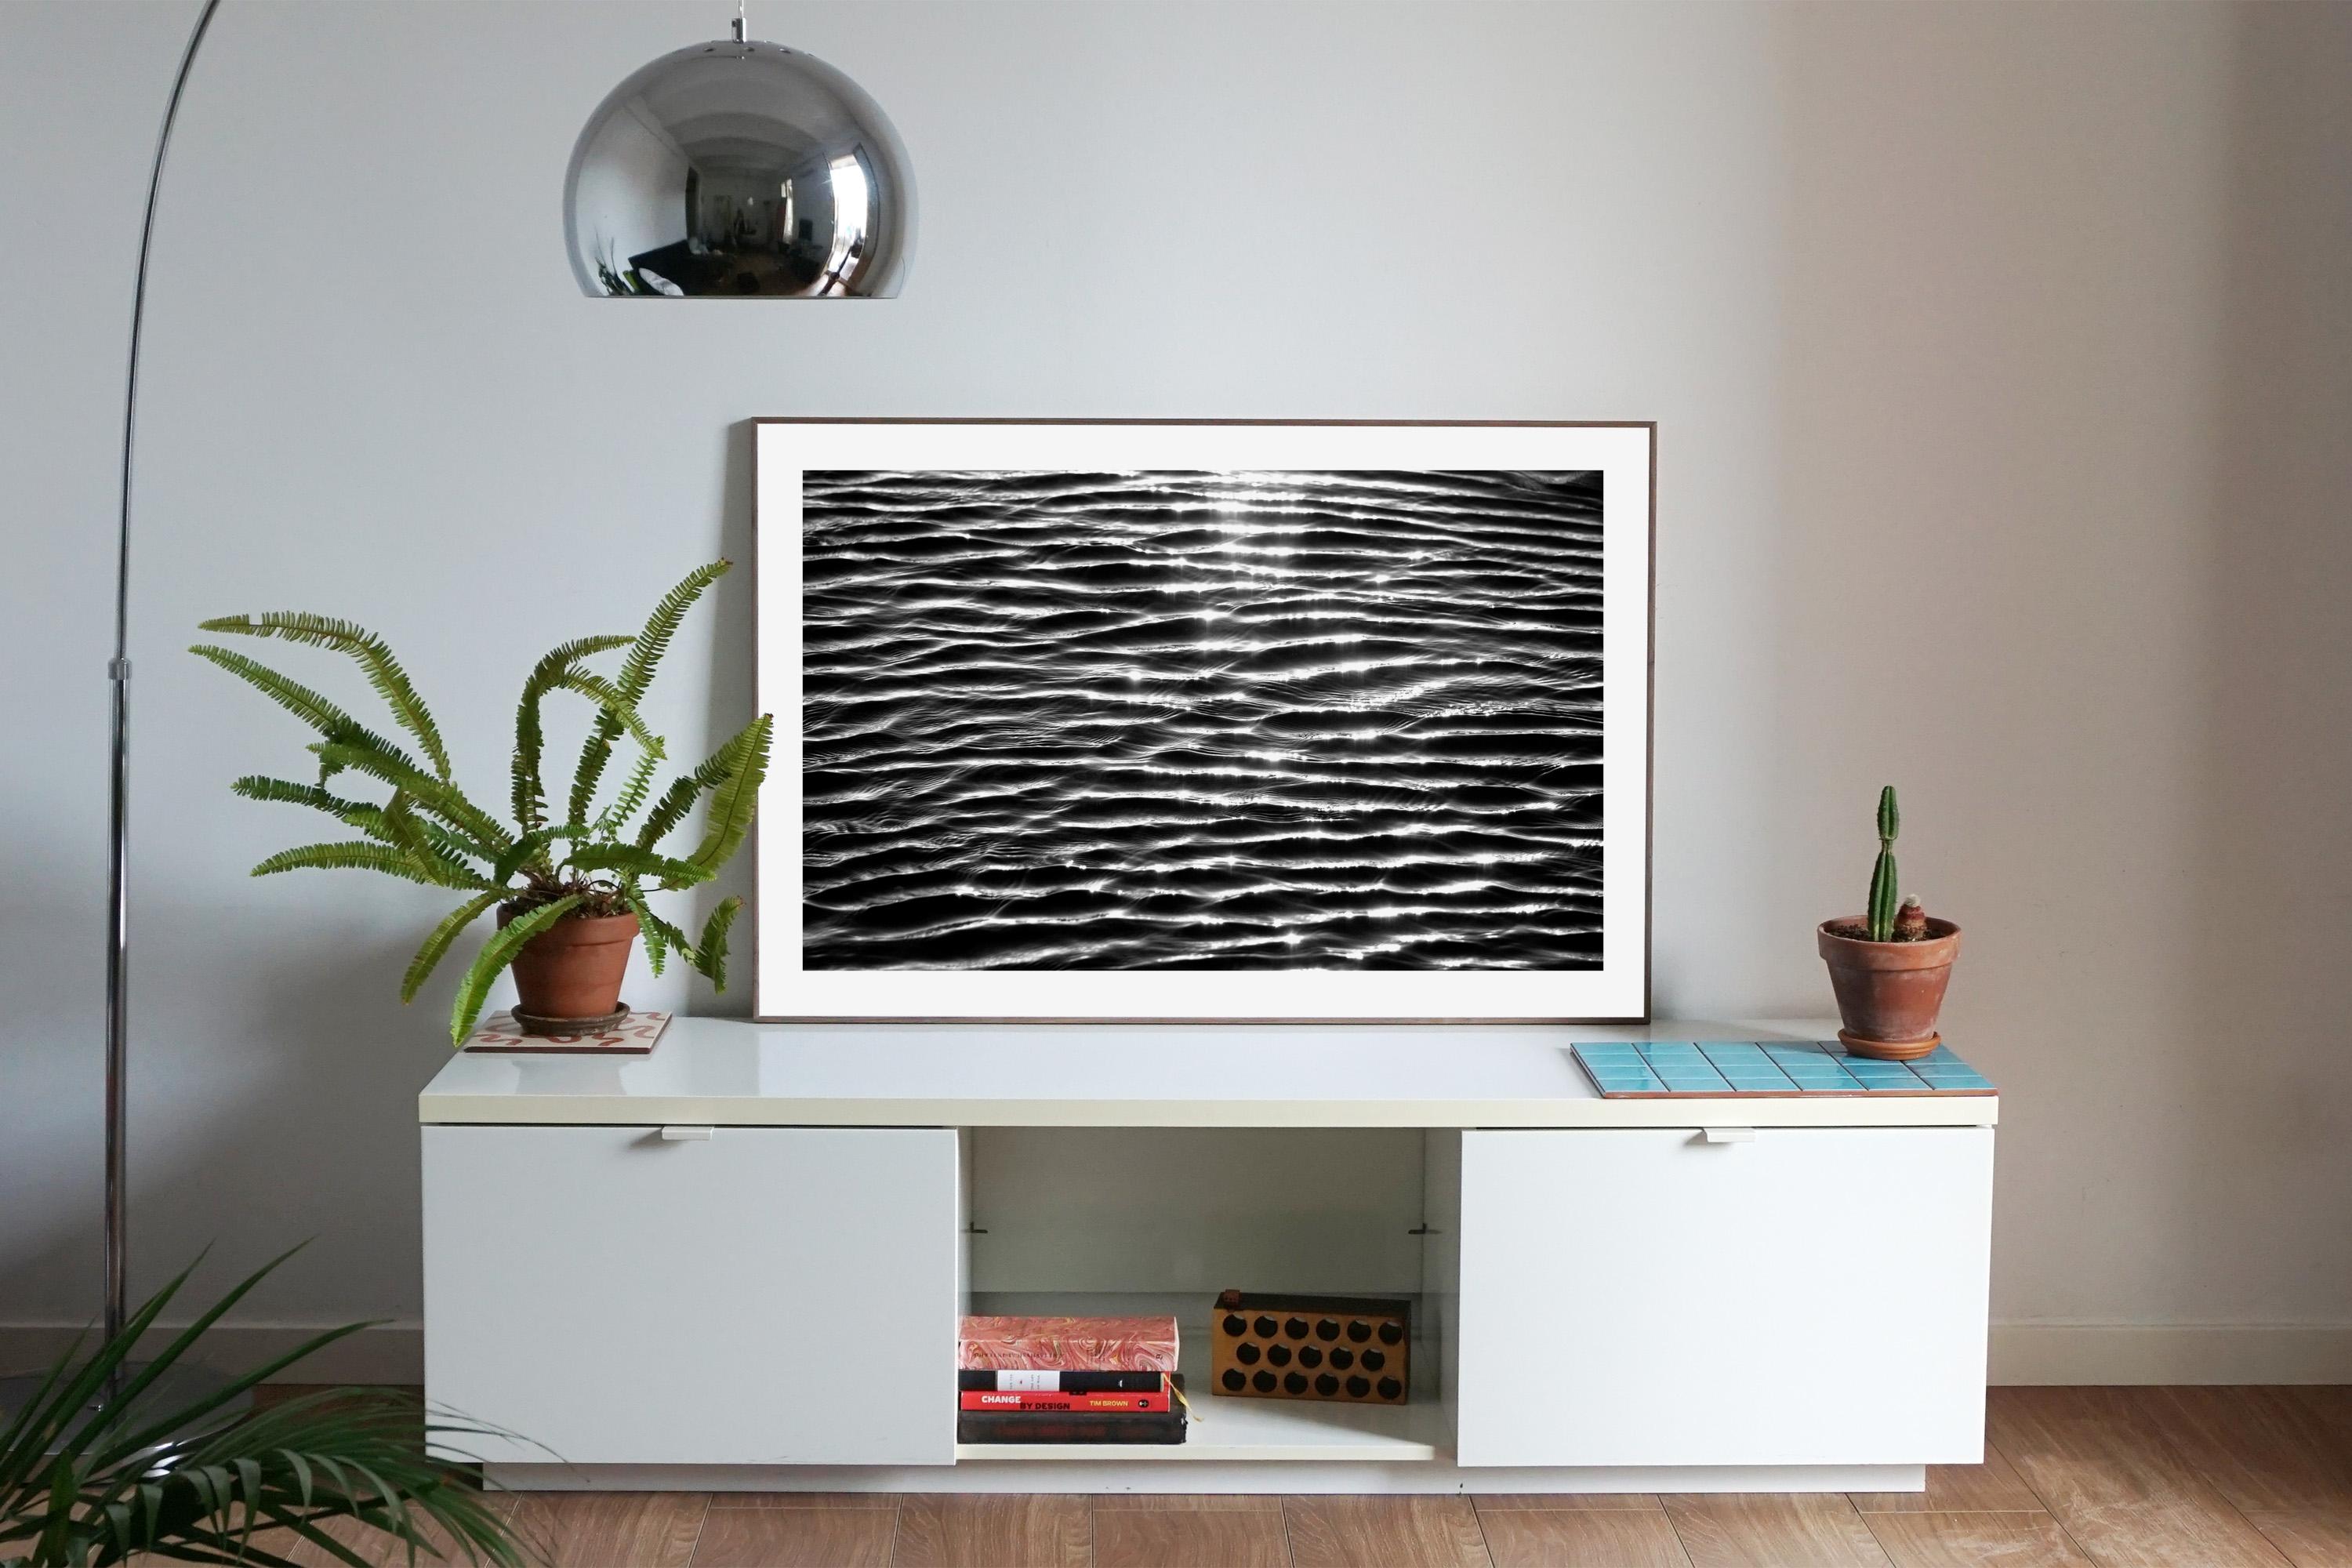 Extra Large Black and White Giclée Print of Tranquil Water Patterns, Seascape For Sale 2